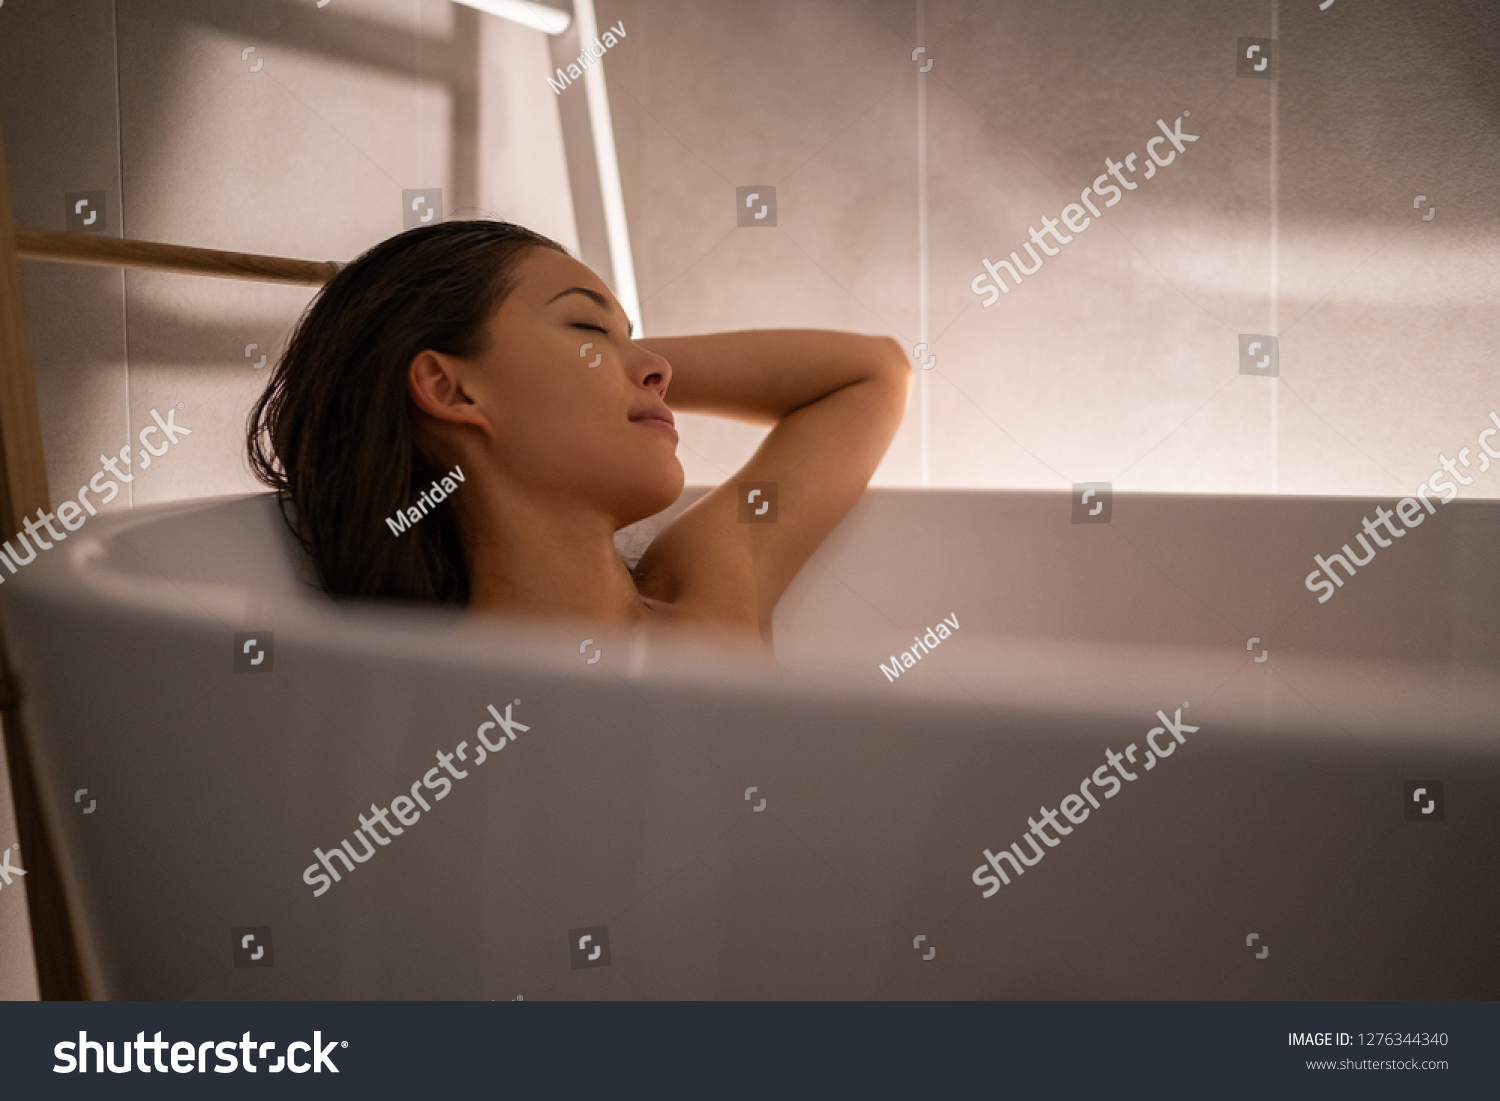 Luxury bath woman relaxing in hotel spa bathtub or home bathroom for total relaxation. Asian lady taking a bath sleeping in warm water, winter wellness. #1276344340